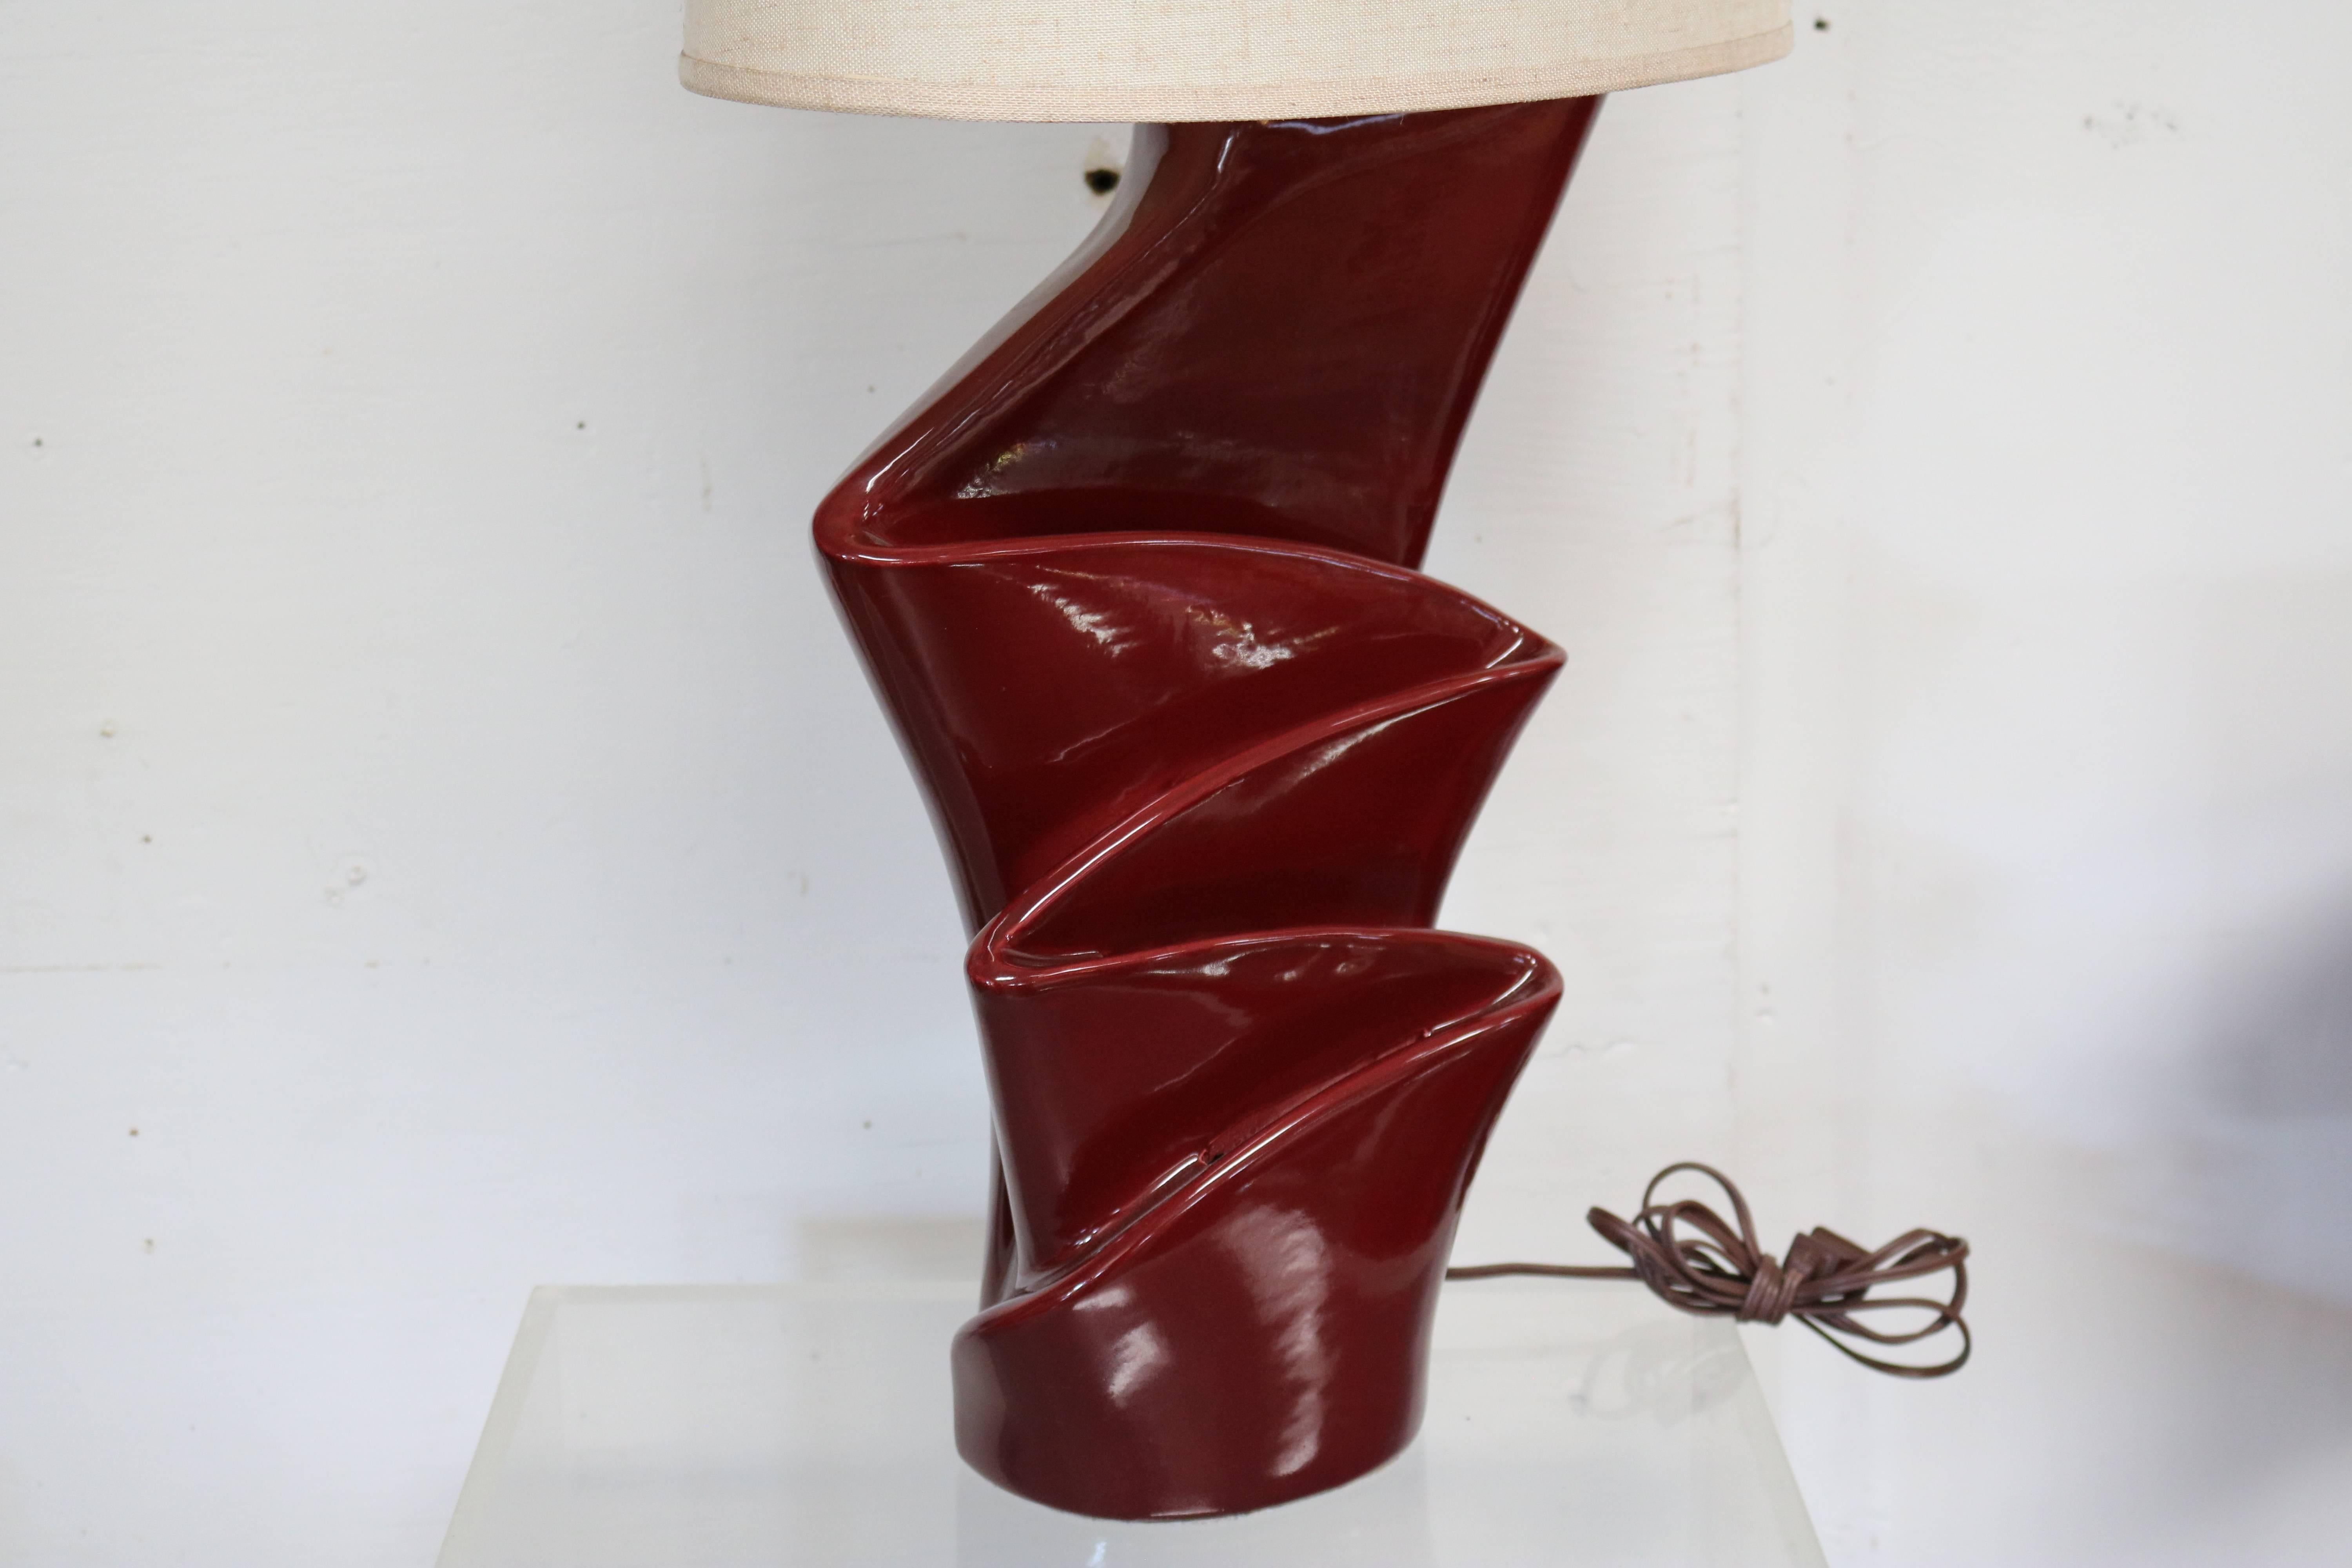 Pair of table lamps featuring a draped, curtain-like base rendered in ceramic coated with deep red glaze. The lamp bases illuminate separately from the top bulbs. Wired and in working condition. Light settings allow for bases only, top bulbs only,